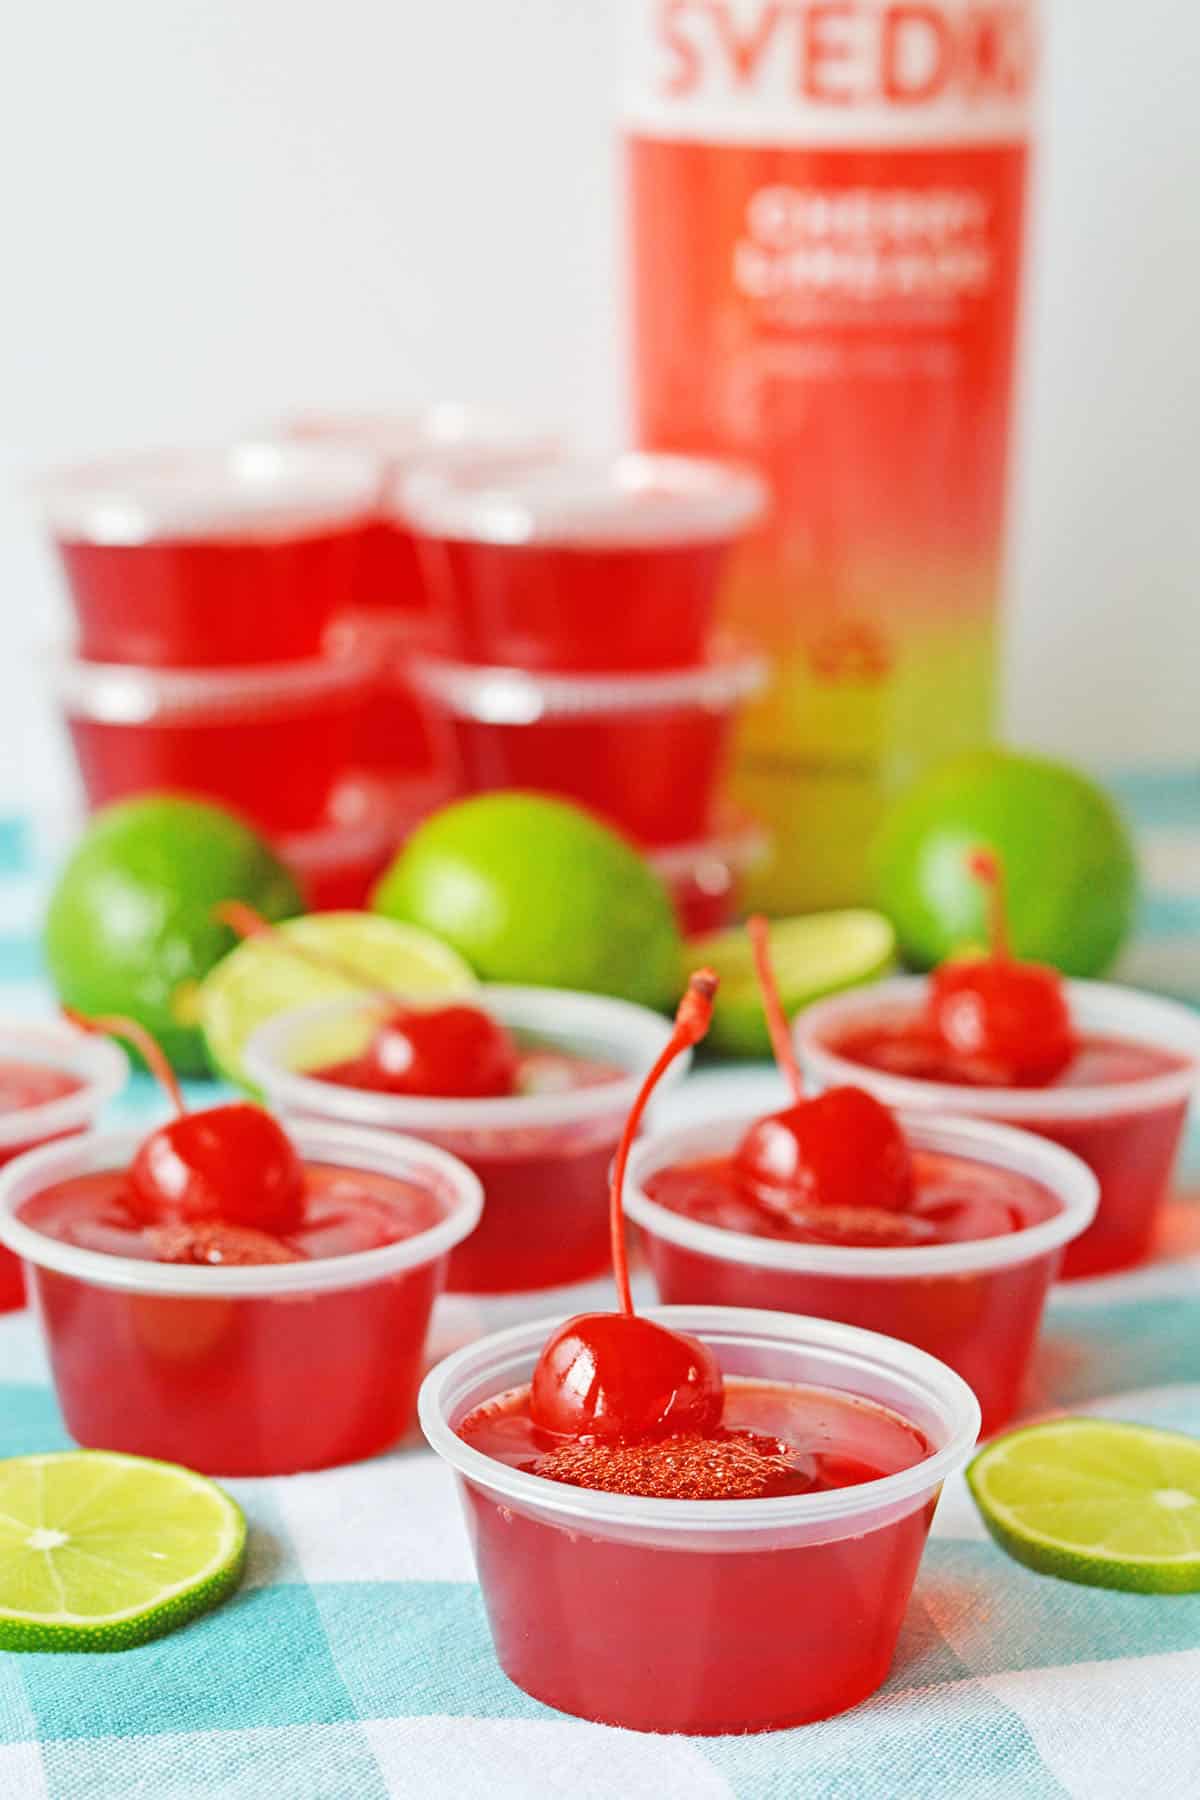 Cherry Jello shots in cups with luscious cherries on top and lime decorations on the table